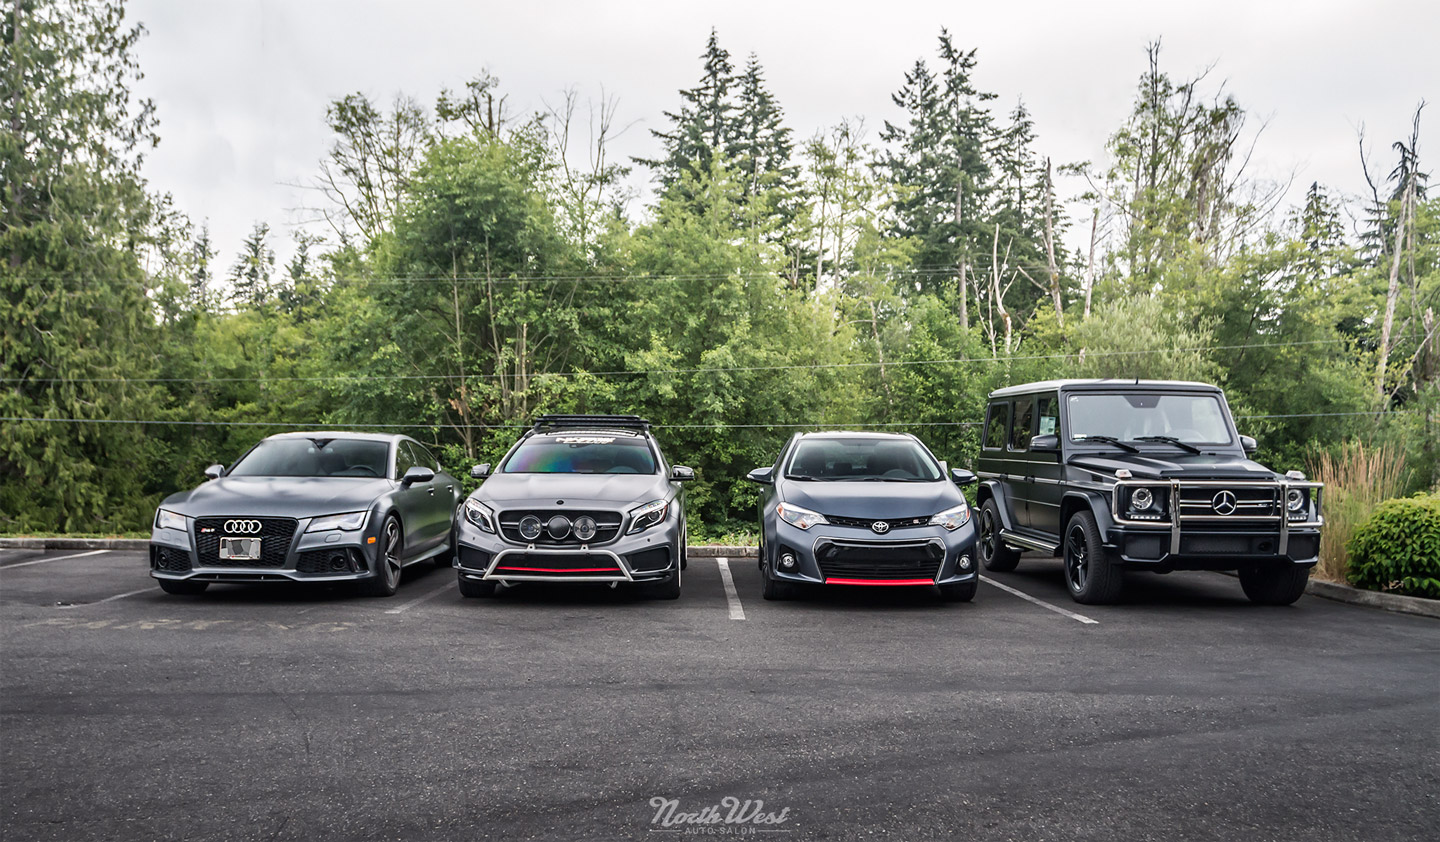 XPEL-STEALTH-Satin-lineup-outside-NWAS-s